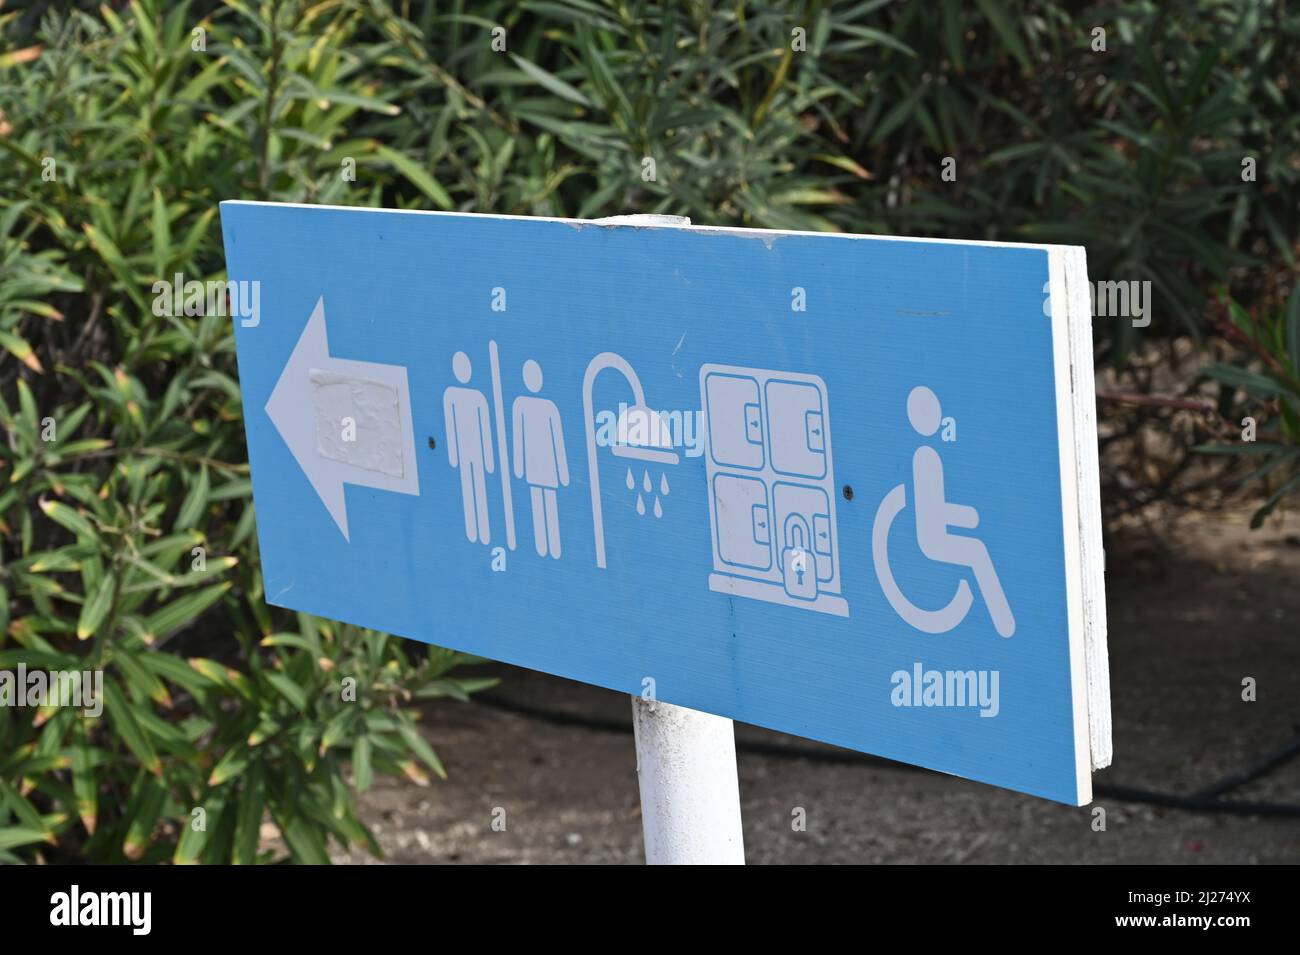 A blue directional sign pointing to the restrooms , showers, Wc, loo, toilet, for men women and having disabled access Stock Photo